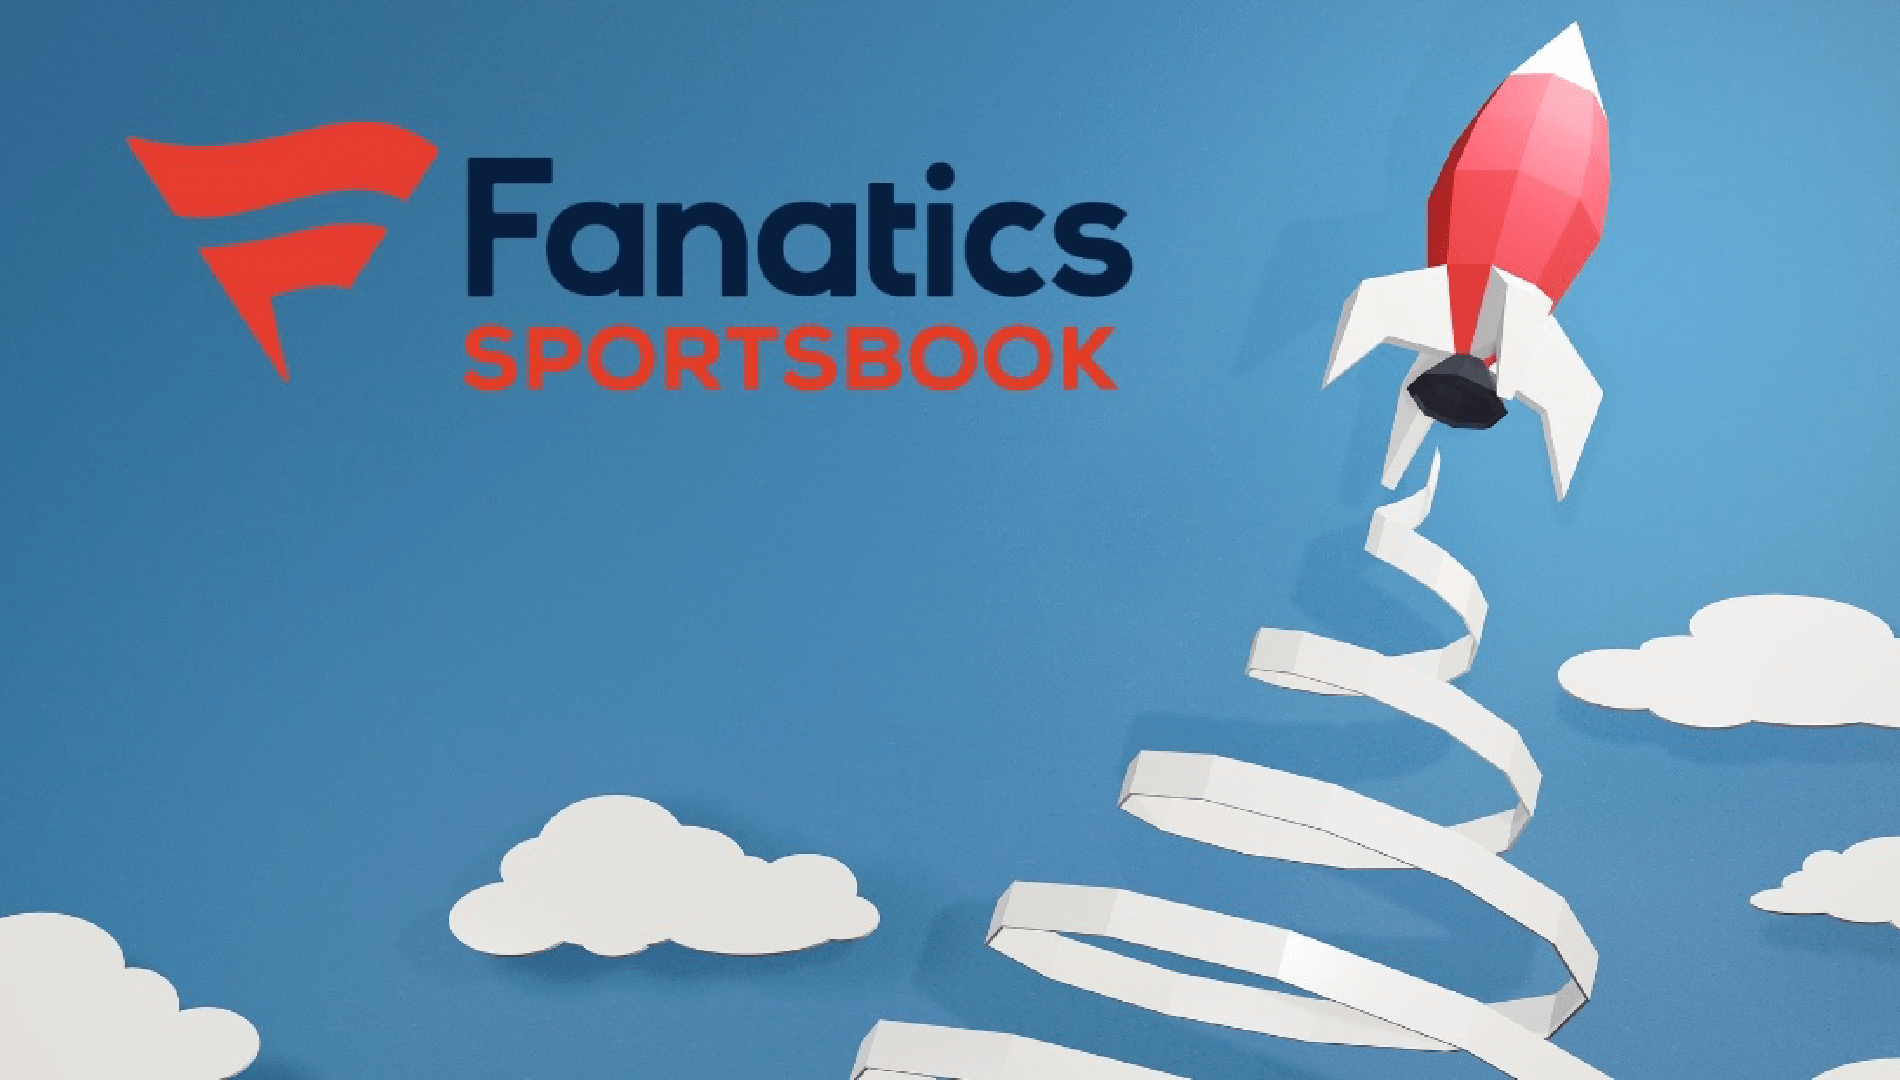 Fanatics Sportsbook Kicks Off Connecticut Presence with Exciting Soft Launch